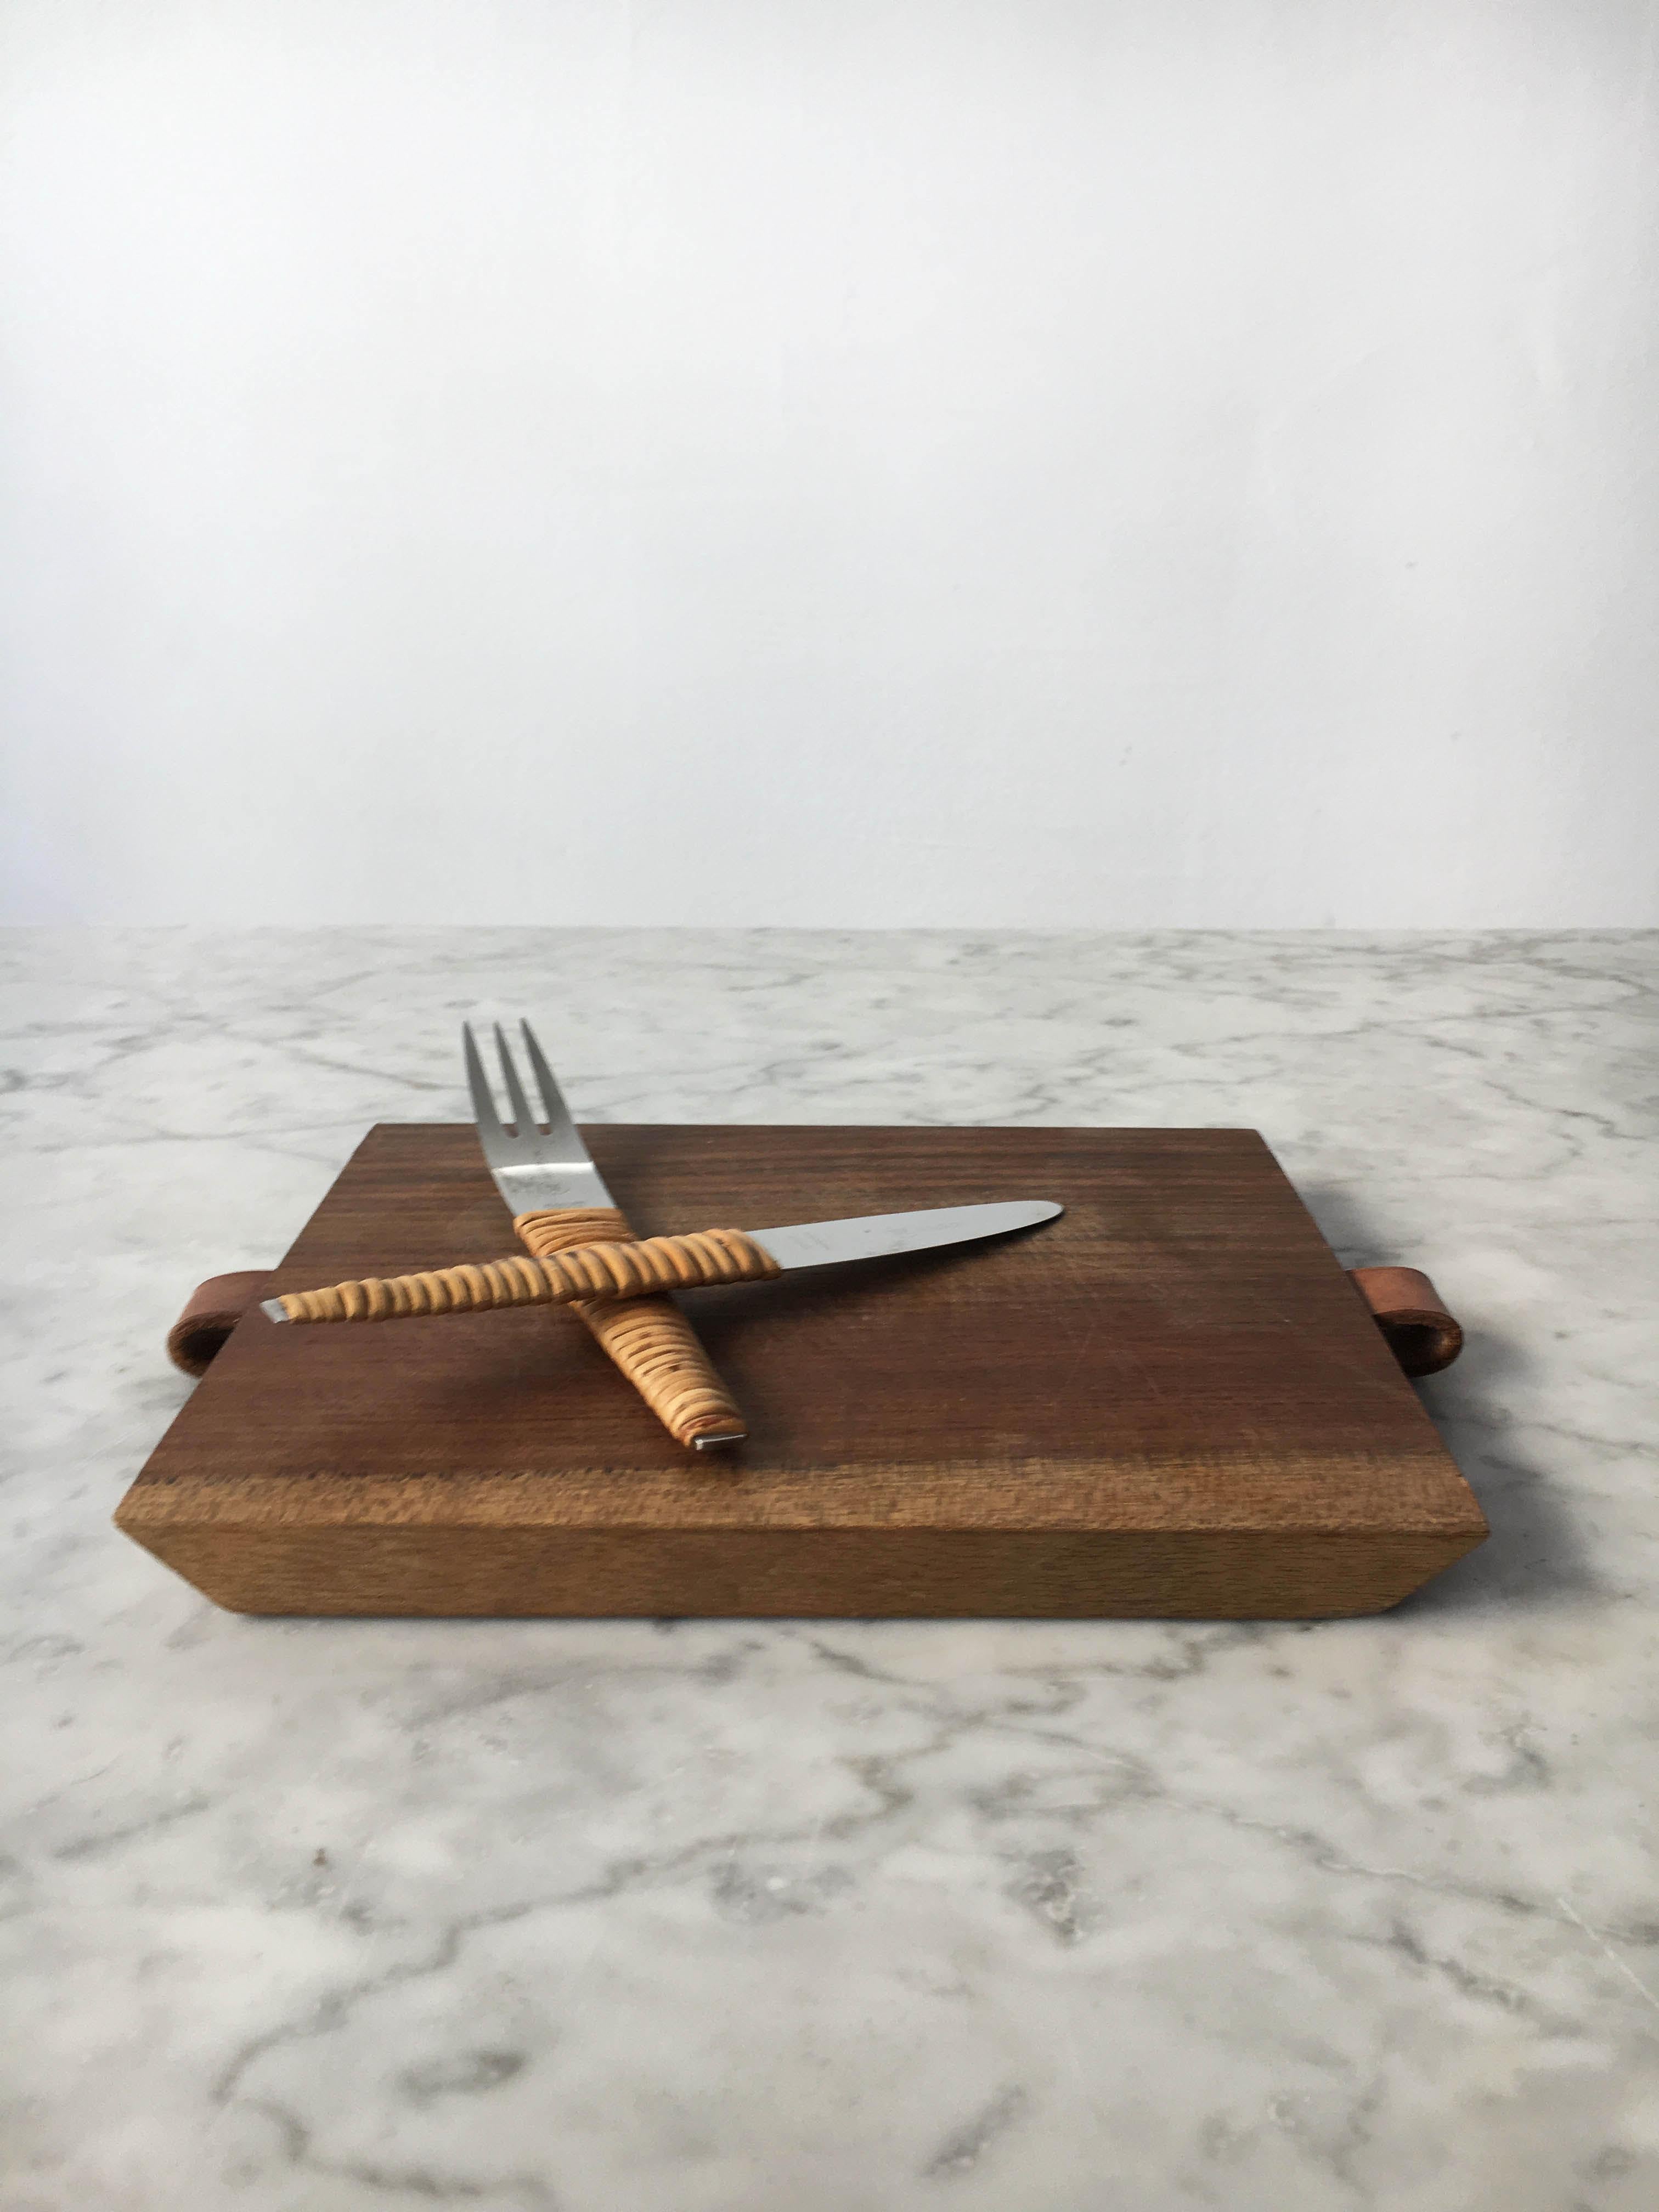 20th Century Carl Auböck Picnic Board with Knife and Fork, Austria, 1950s For Sale